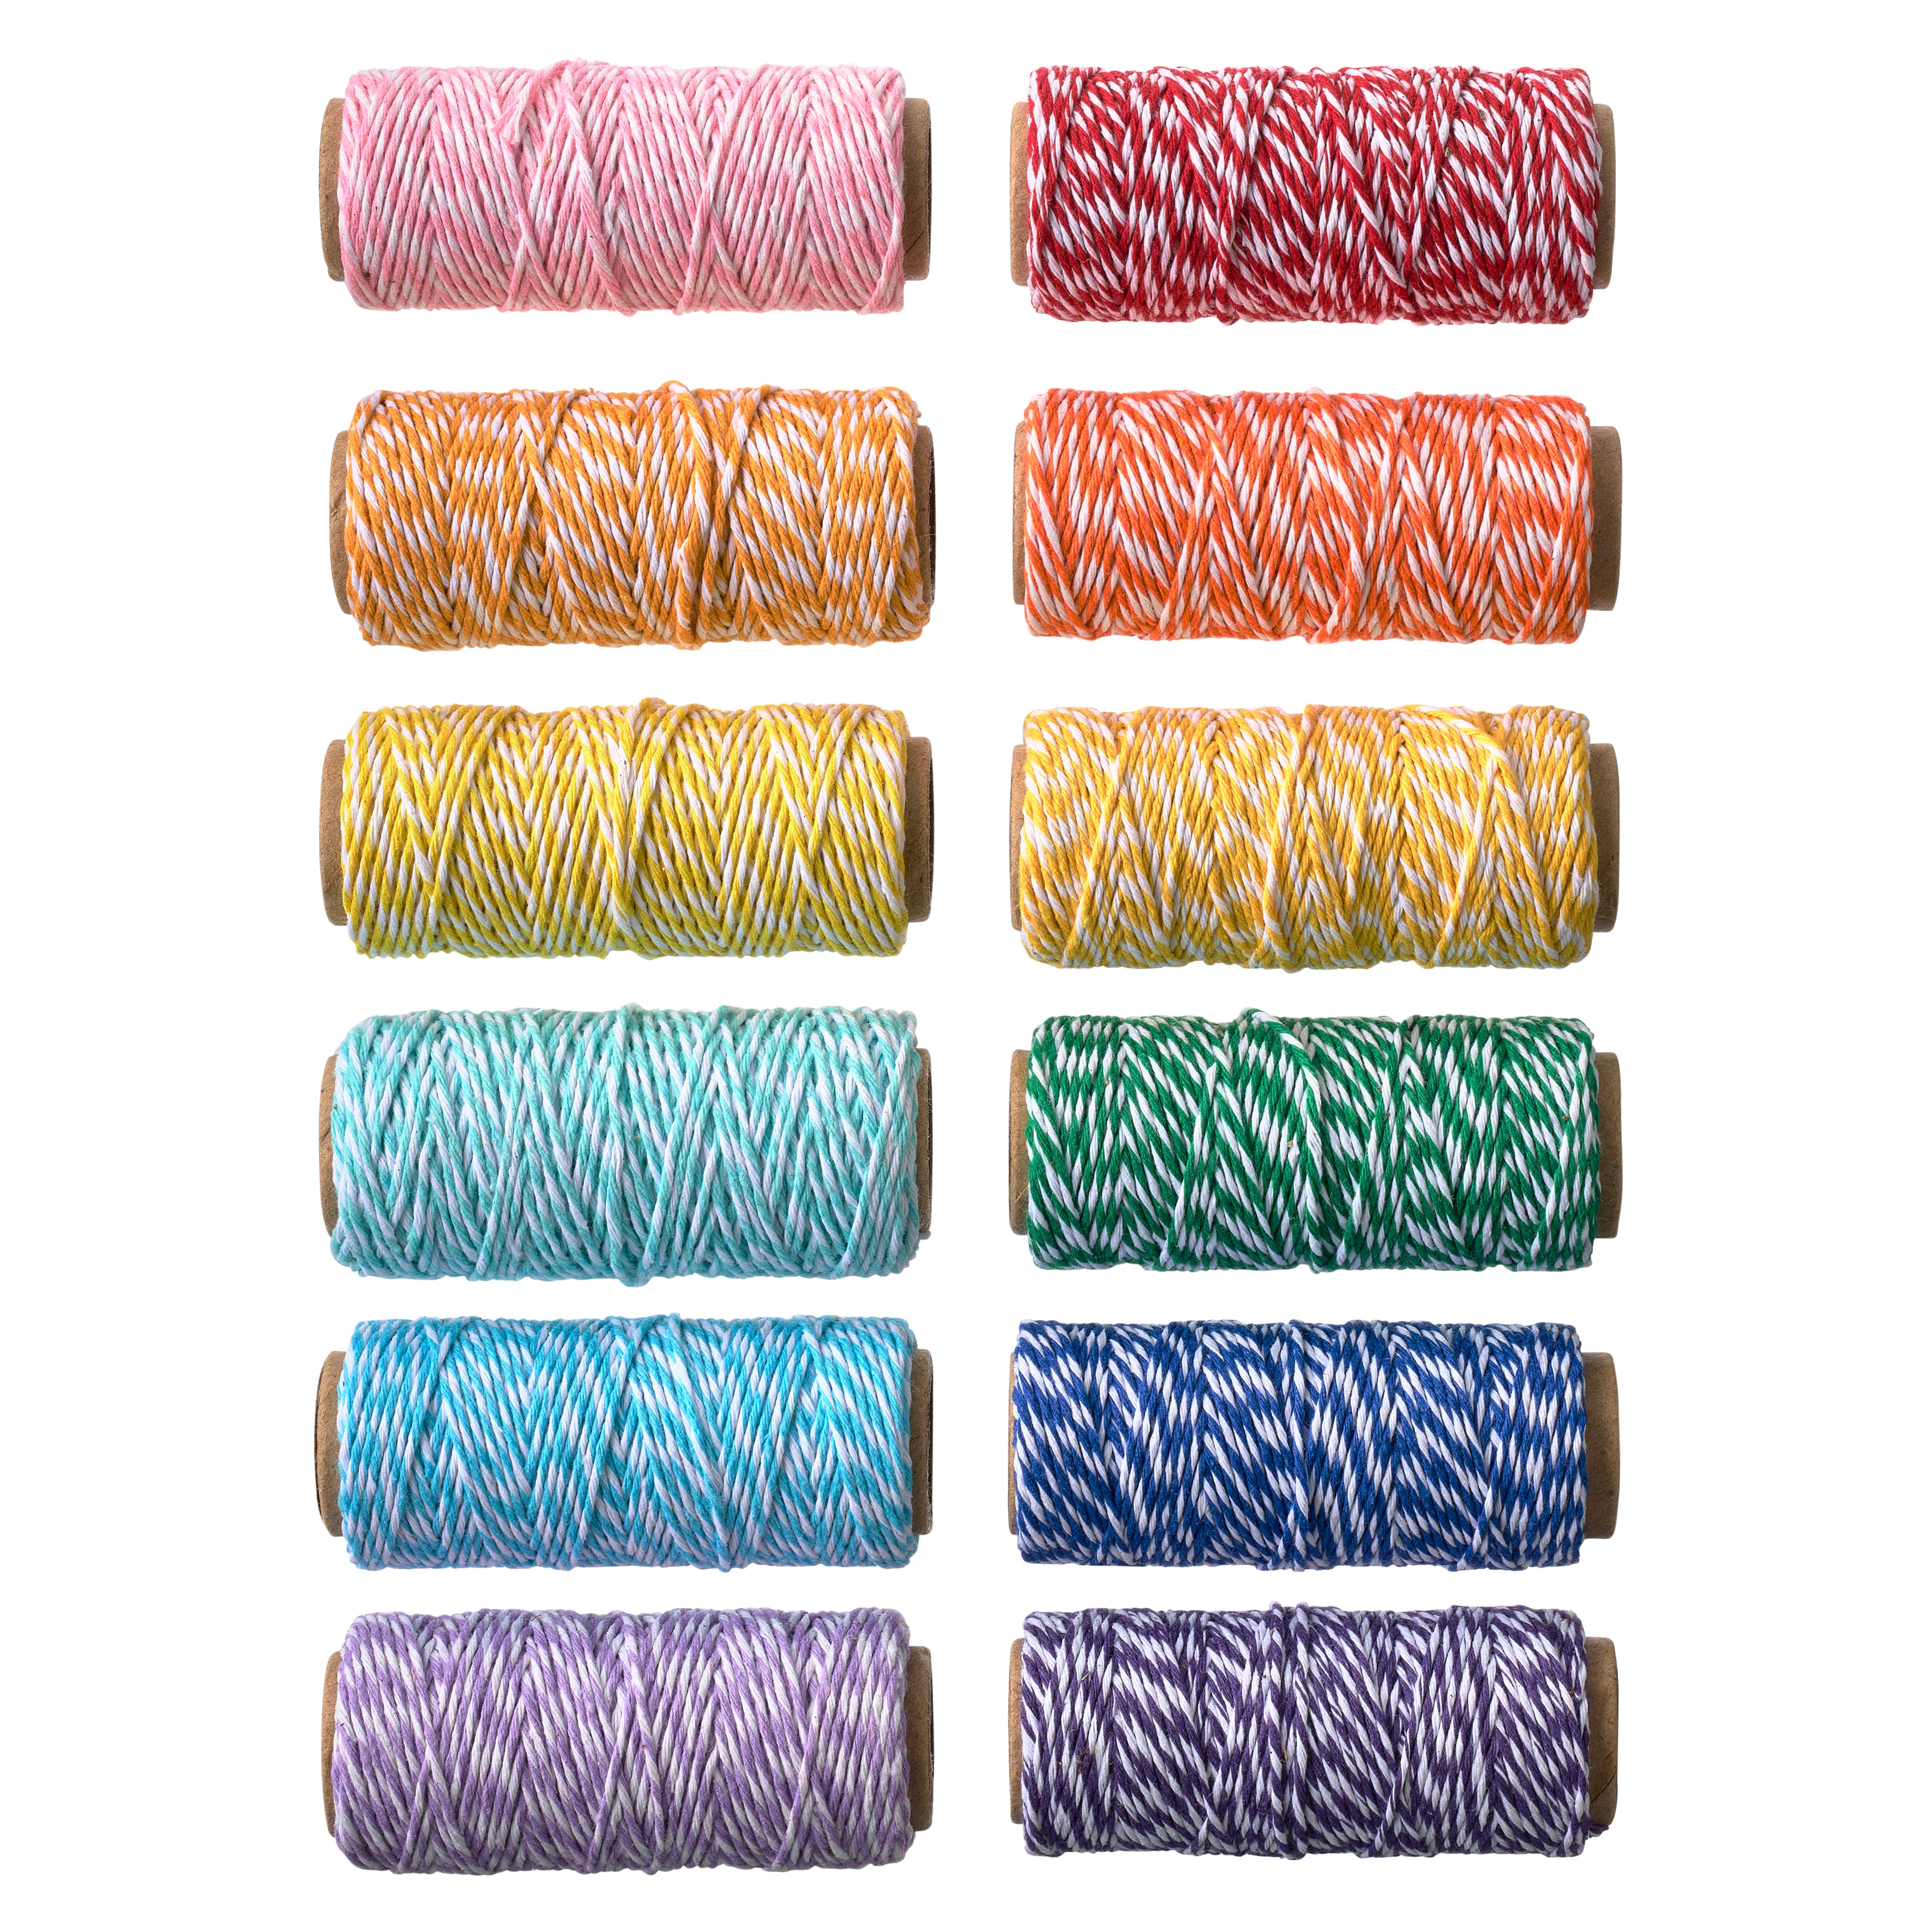 6 Packs: 12 ct. (72 total) 25yd. Rainbow Mix Twine Spools by Recollections&#x2122;